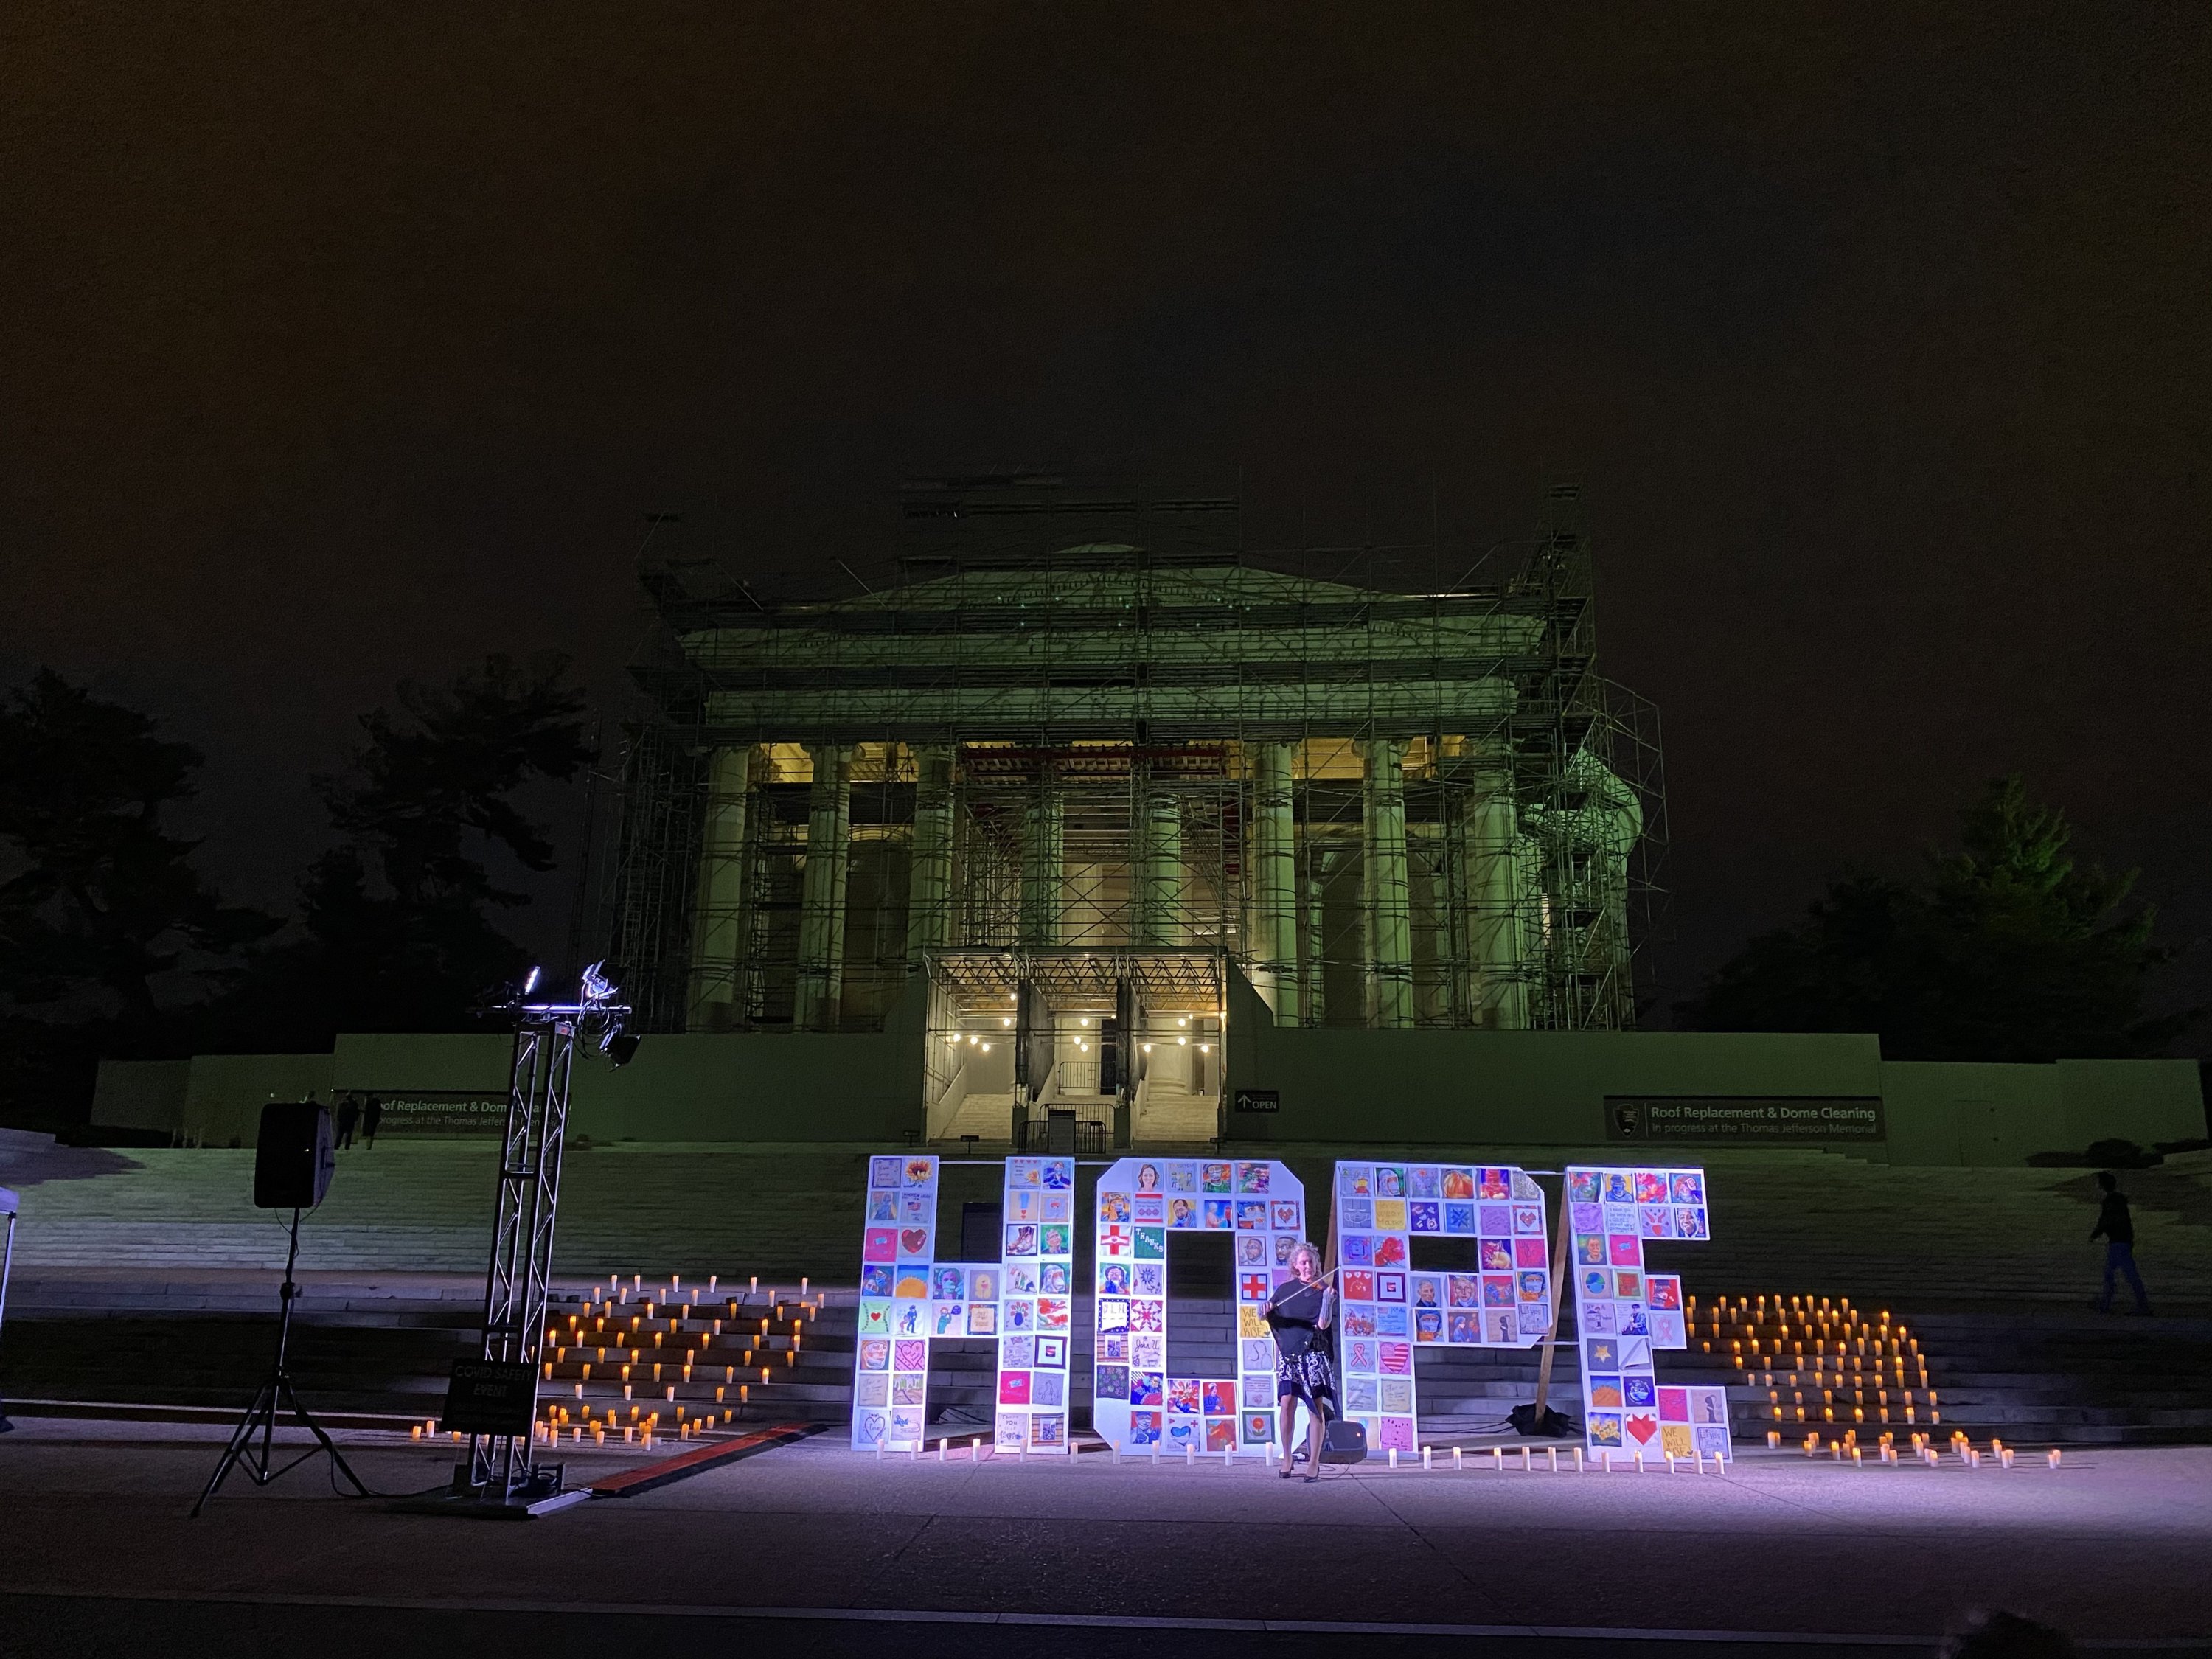 PHOTOS: A "HOPE" Quilt to Honor Frontline Workers | Washingtonian (DC)